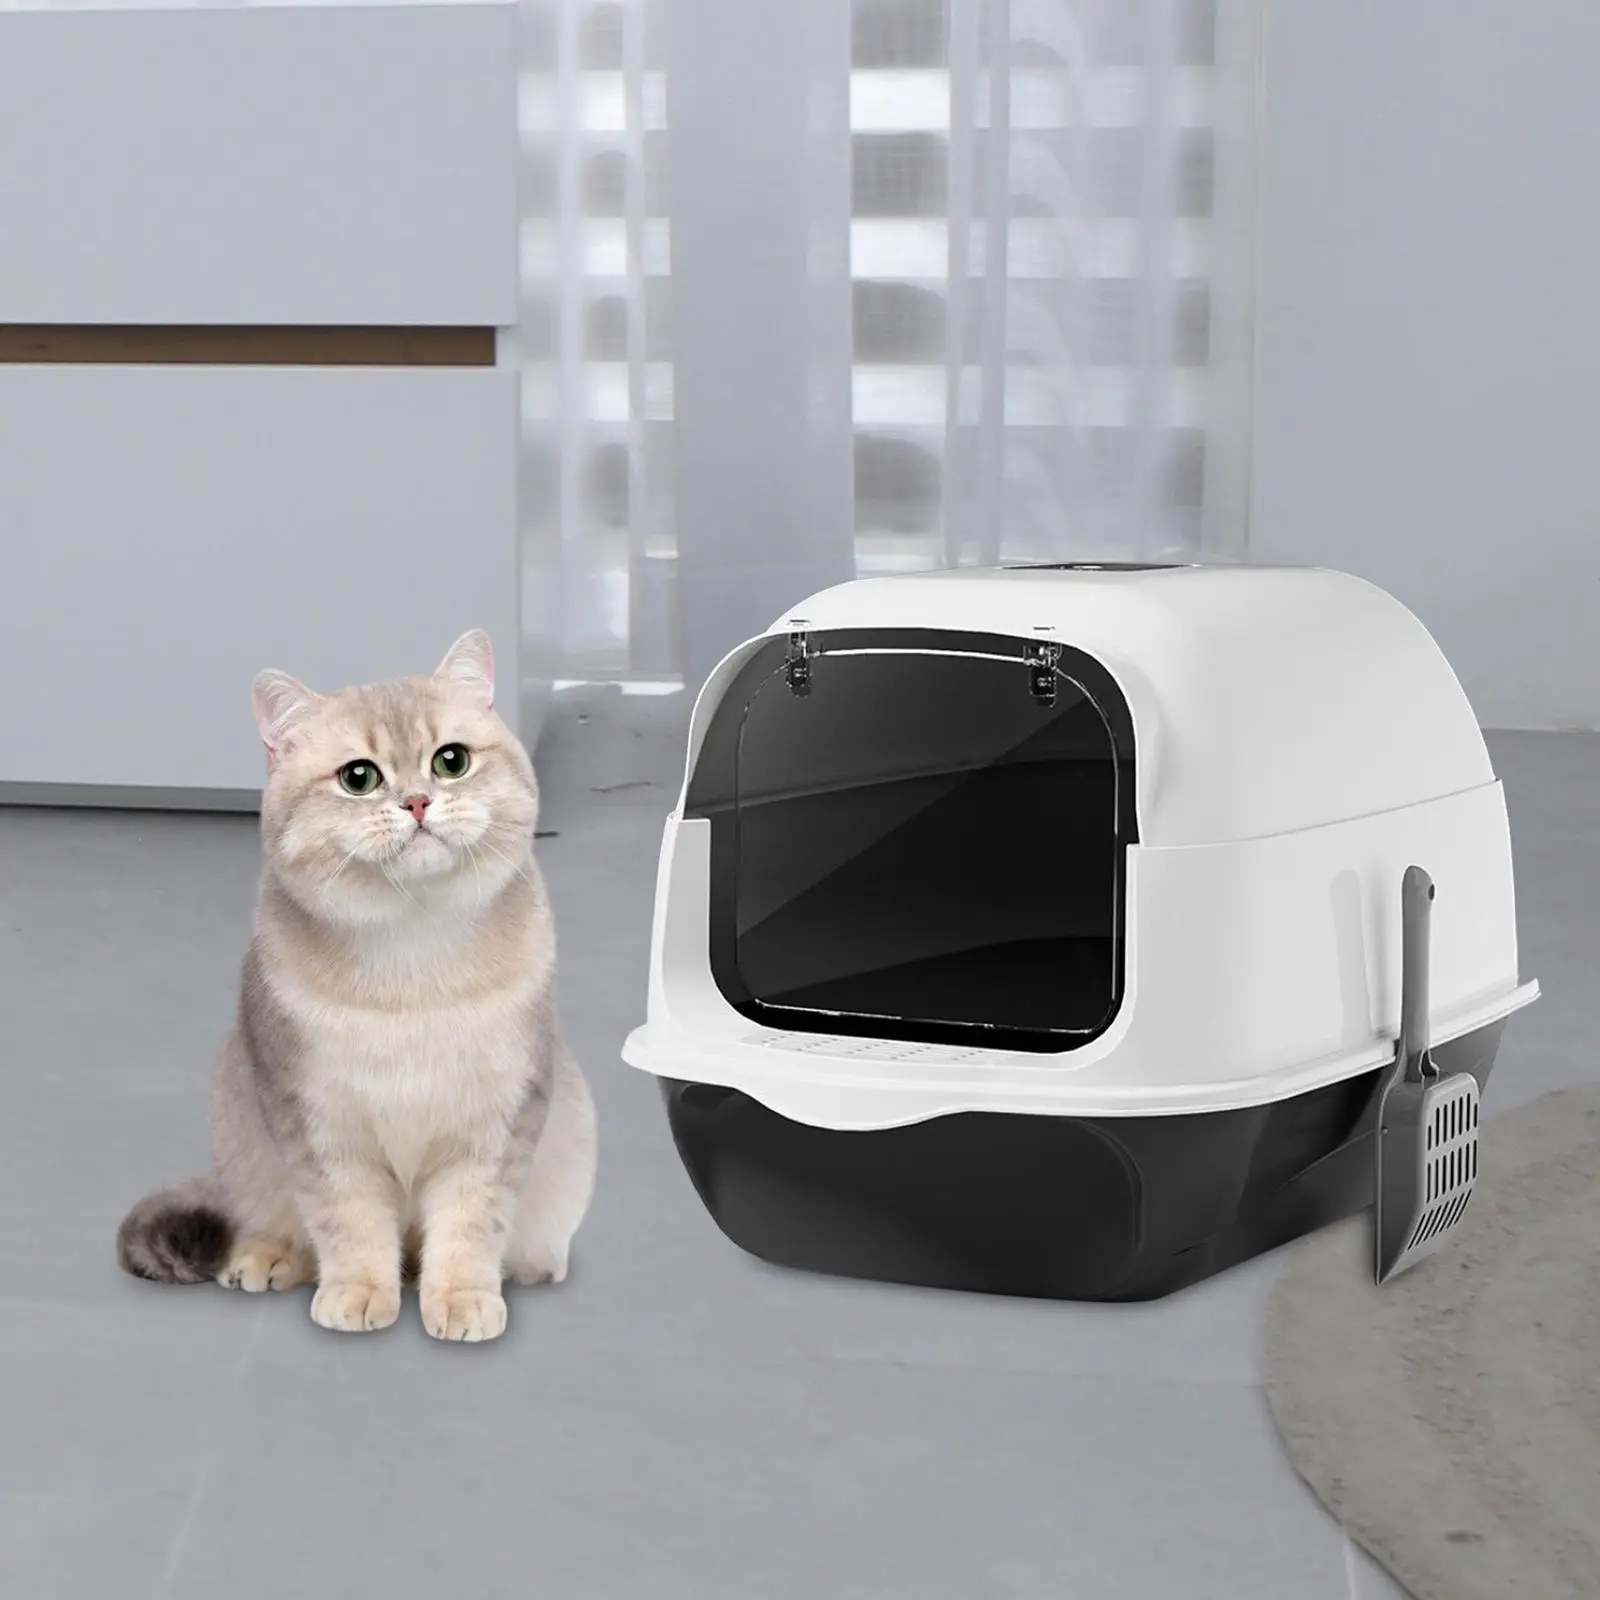 Hooded Cat Litter Box Large Cat Toilet with Shovel Durable Large Cat Litter Box Detachable with Door Hooded Cat Litter Tray